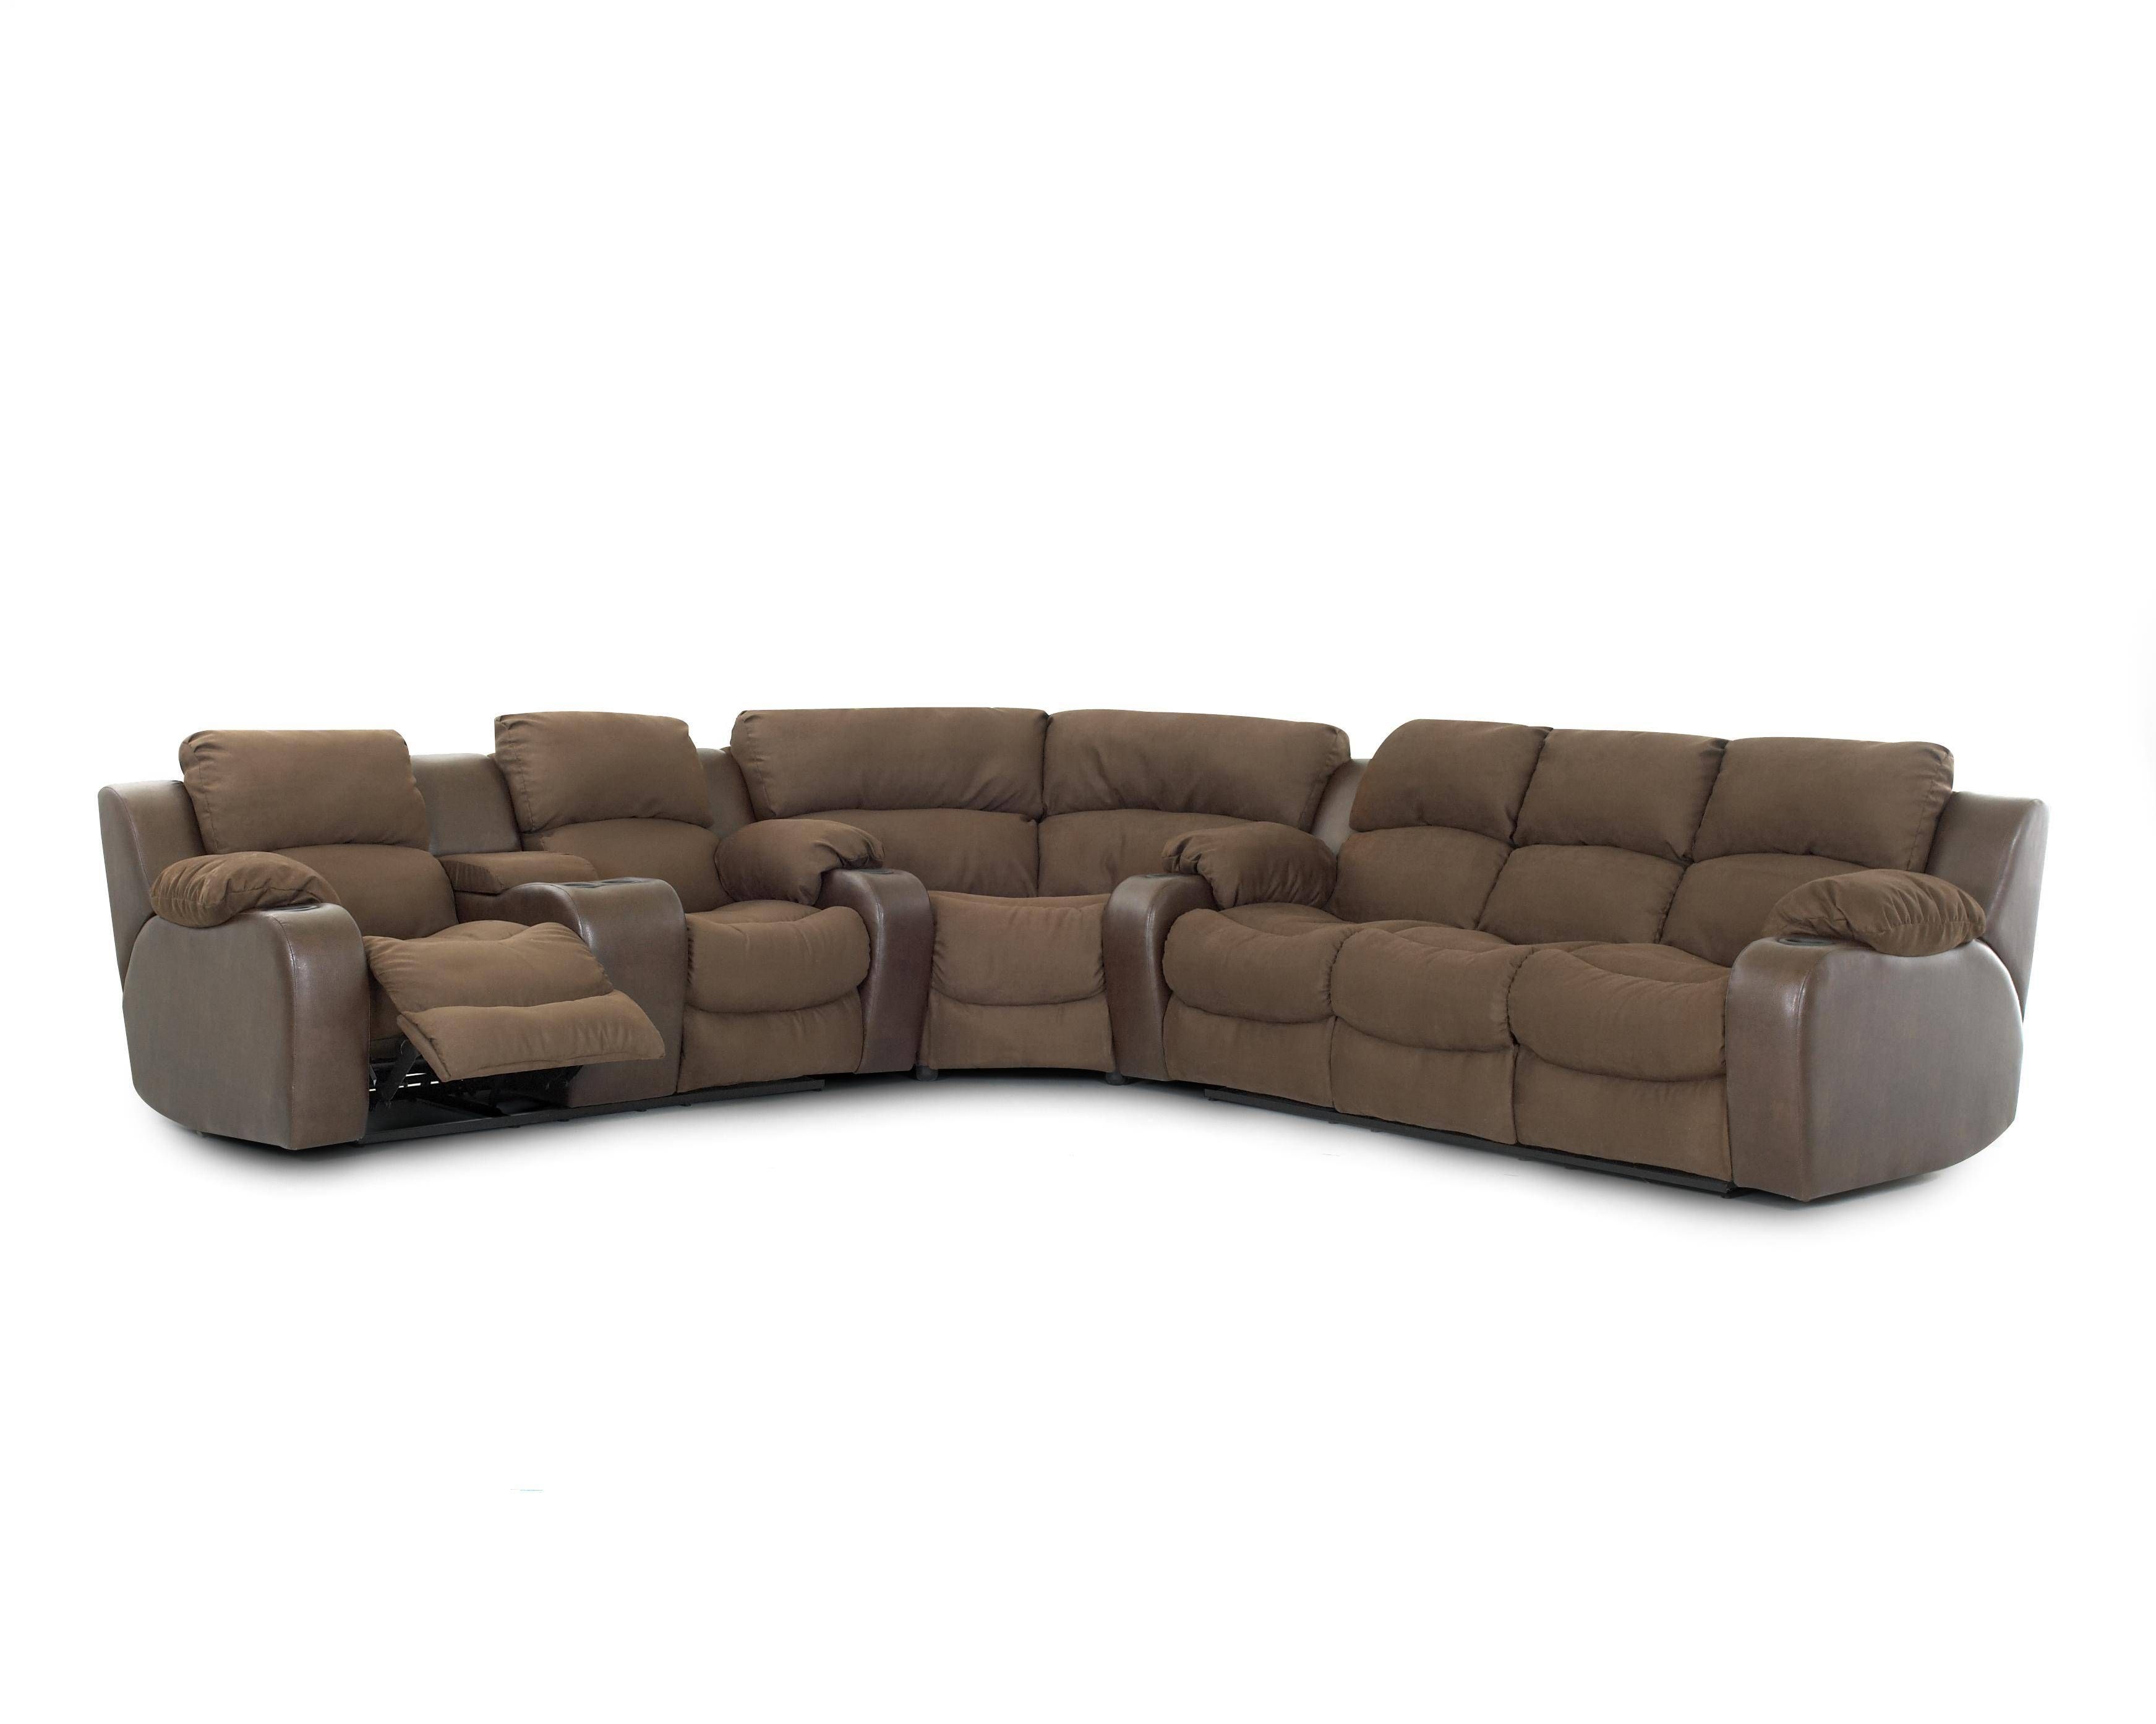 Reclining Sectional Sofa With Consoleklaussner | Wolf And Throughout Sofas With Console (View 4 of 15)